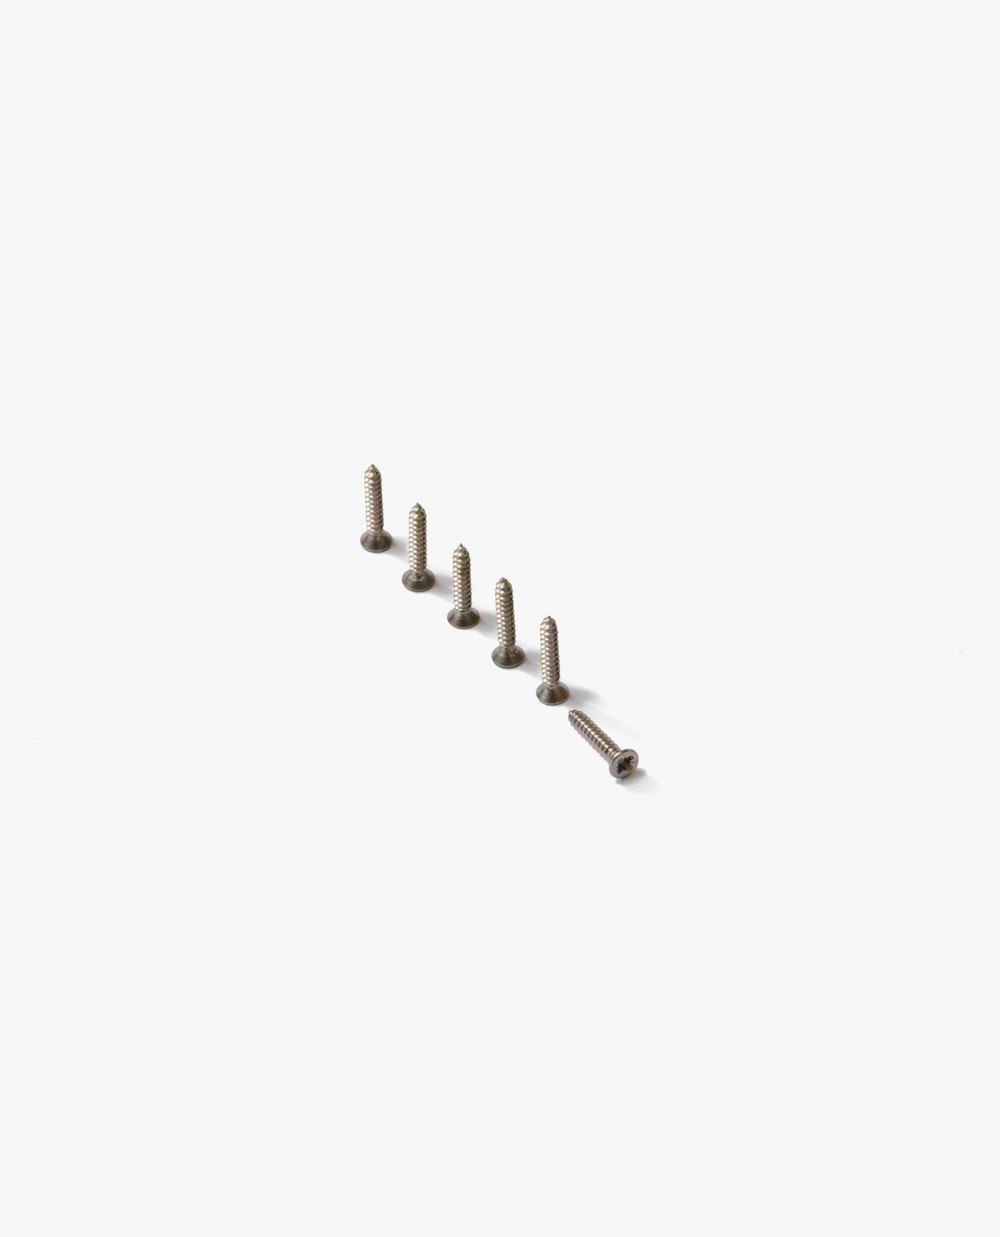 a row of screws sitting on top of a white surface